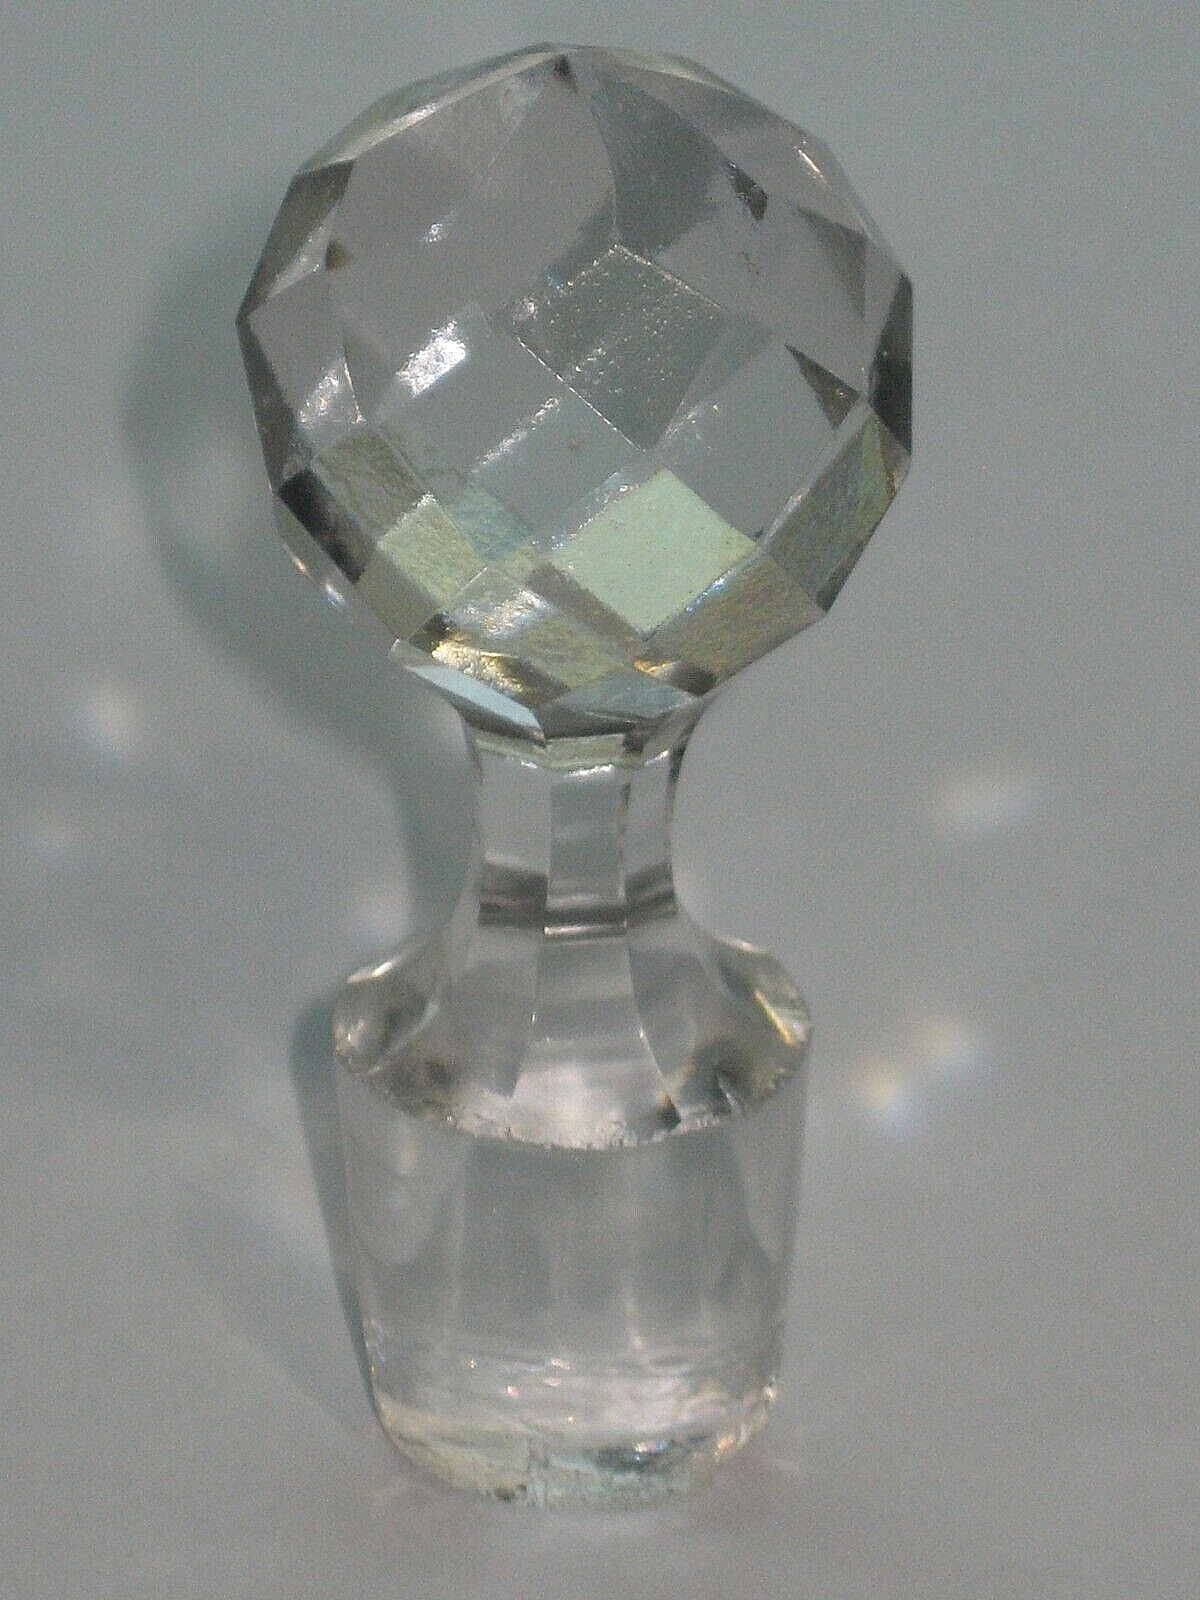 Antique/Vintage Small Faceted Ball Glass Stopper For Bottle Or Decanter - #3